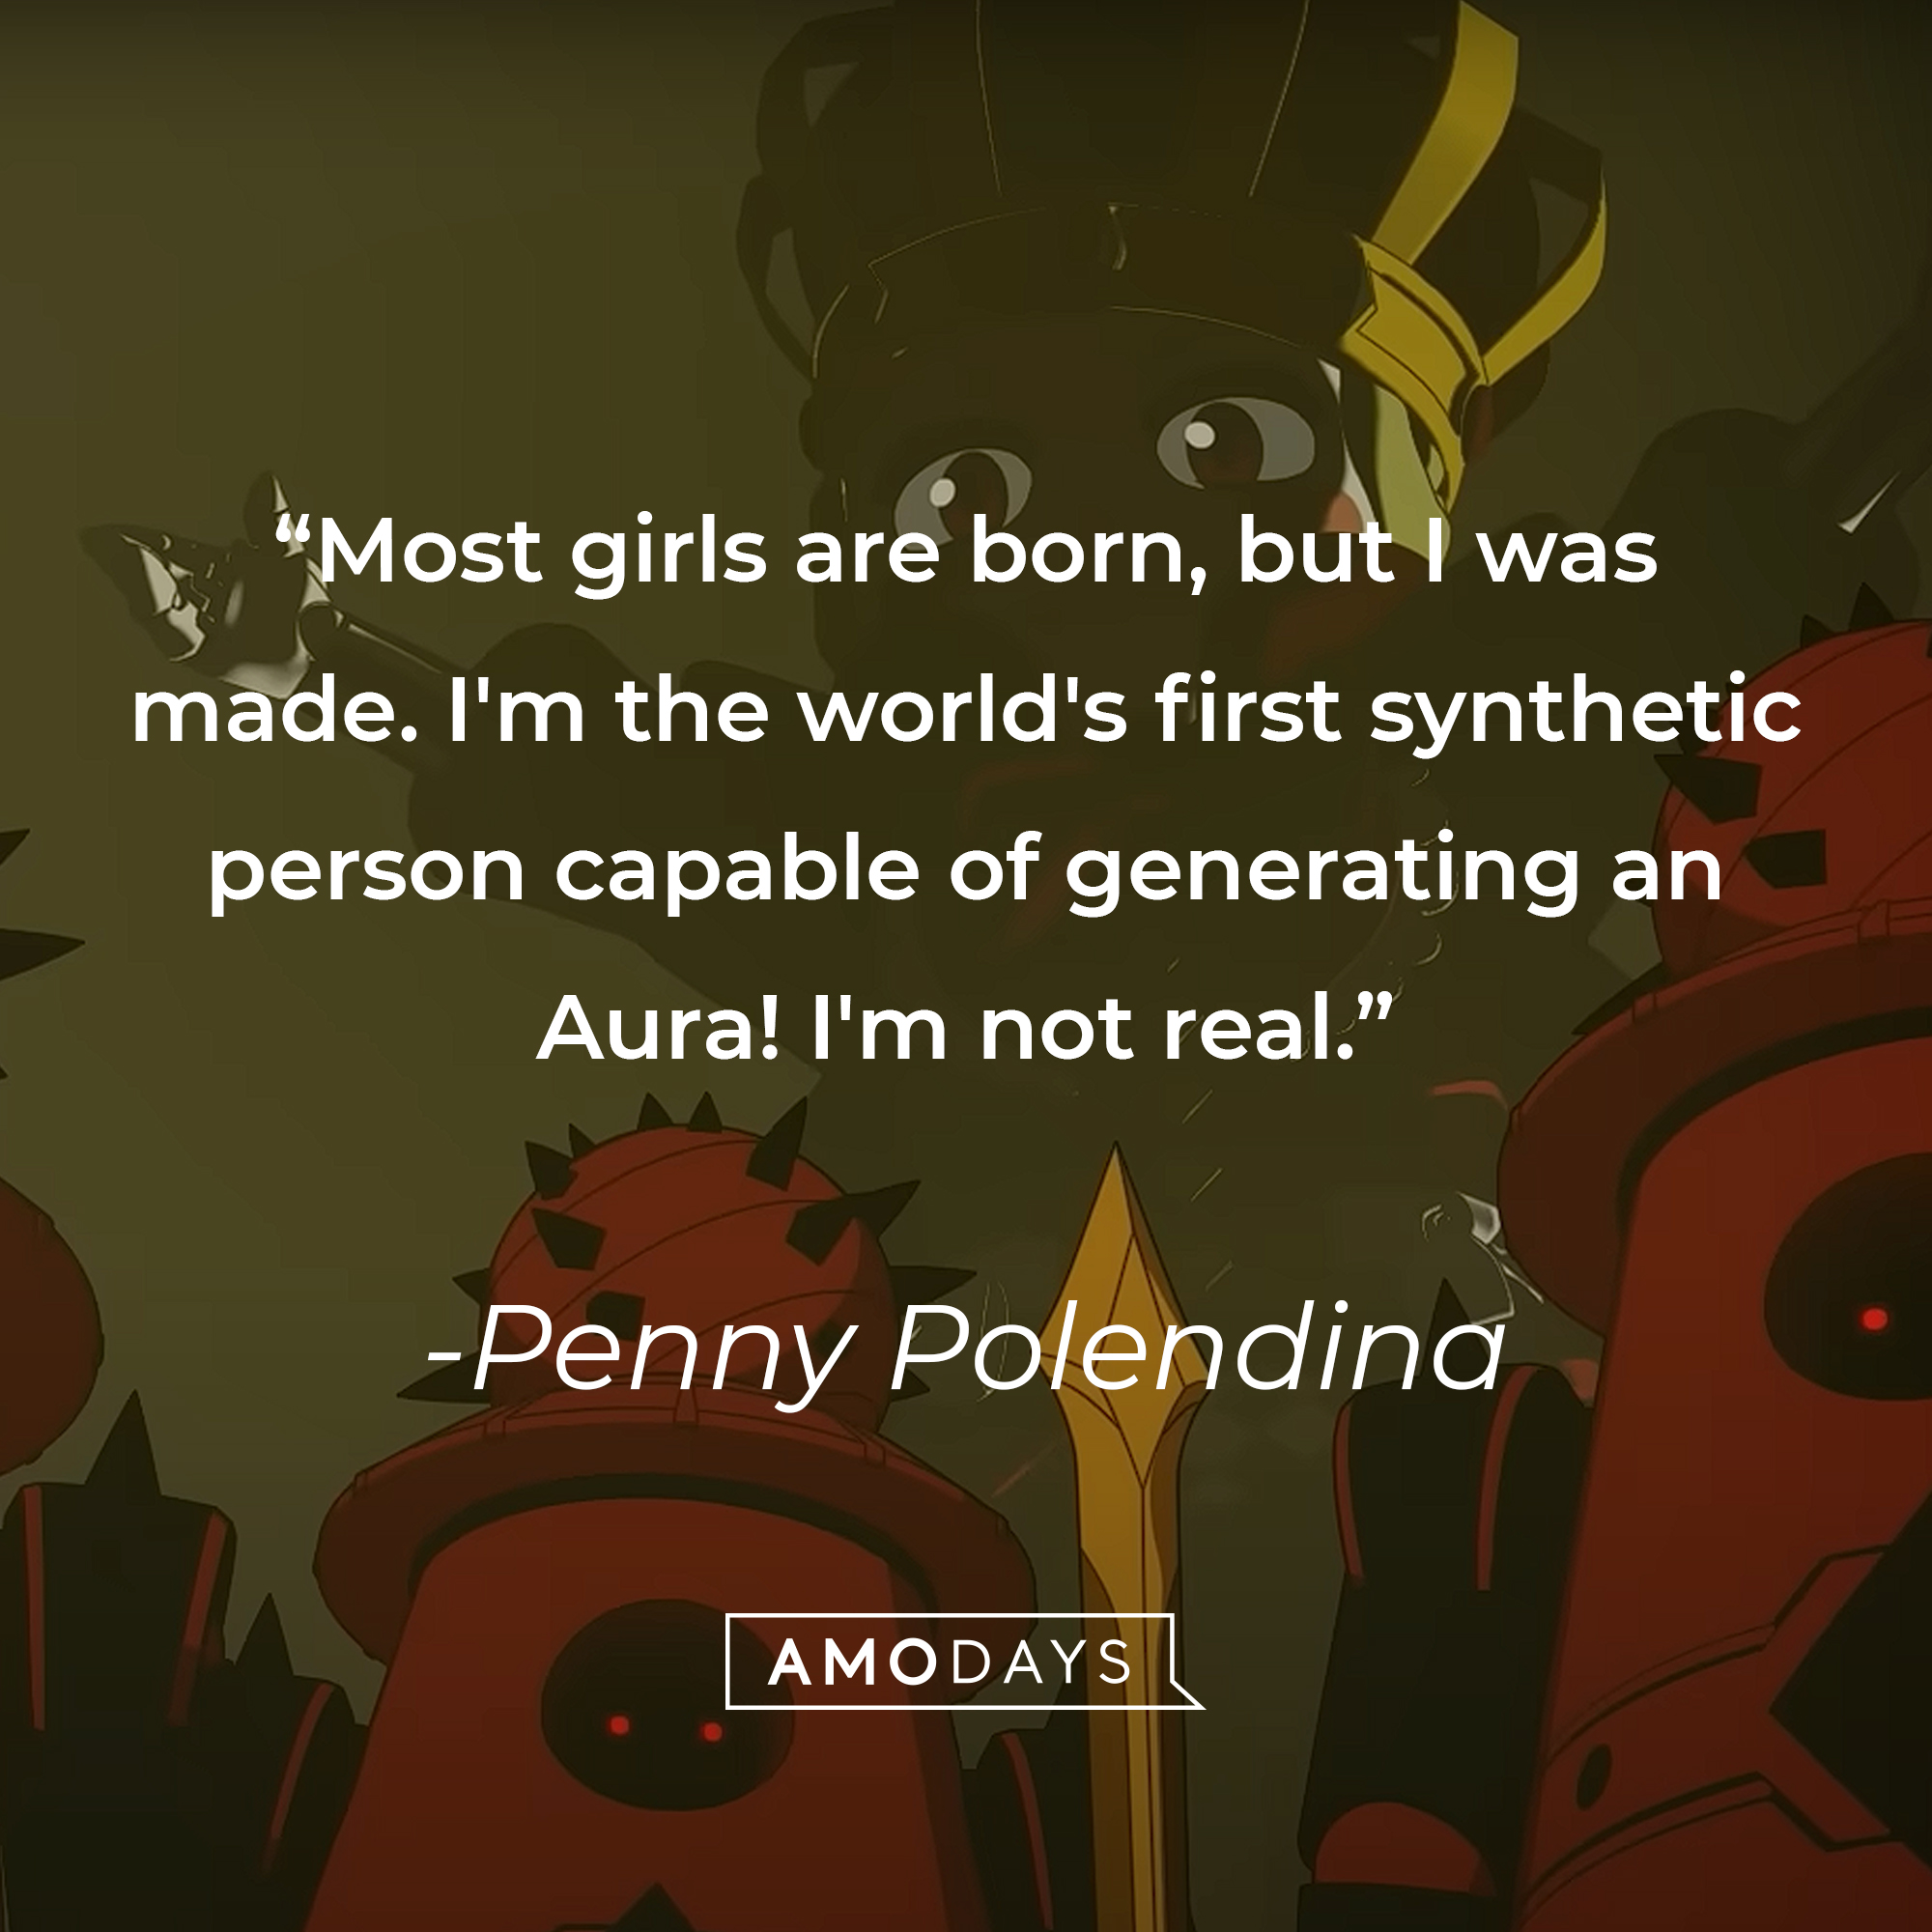 Penny Polendina's quote: "Most girls are born, but I was made. I'm the world's first synthetic person capable of generating an Aura! I'm not real." | Source: Youtube.com/crunchyrolldubs